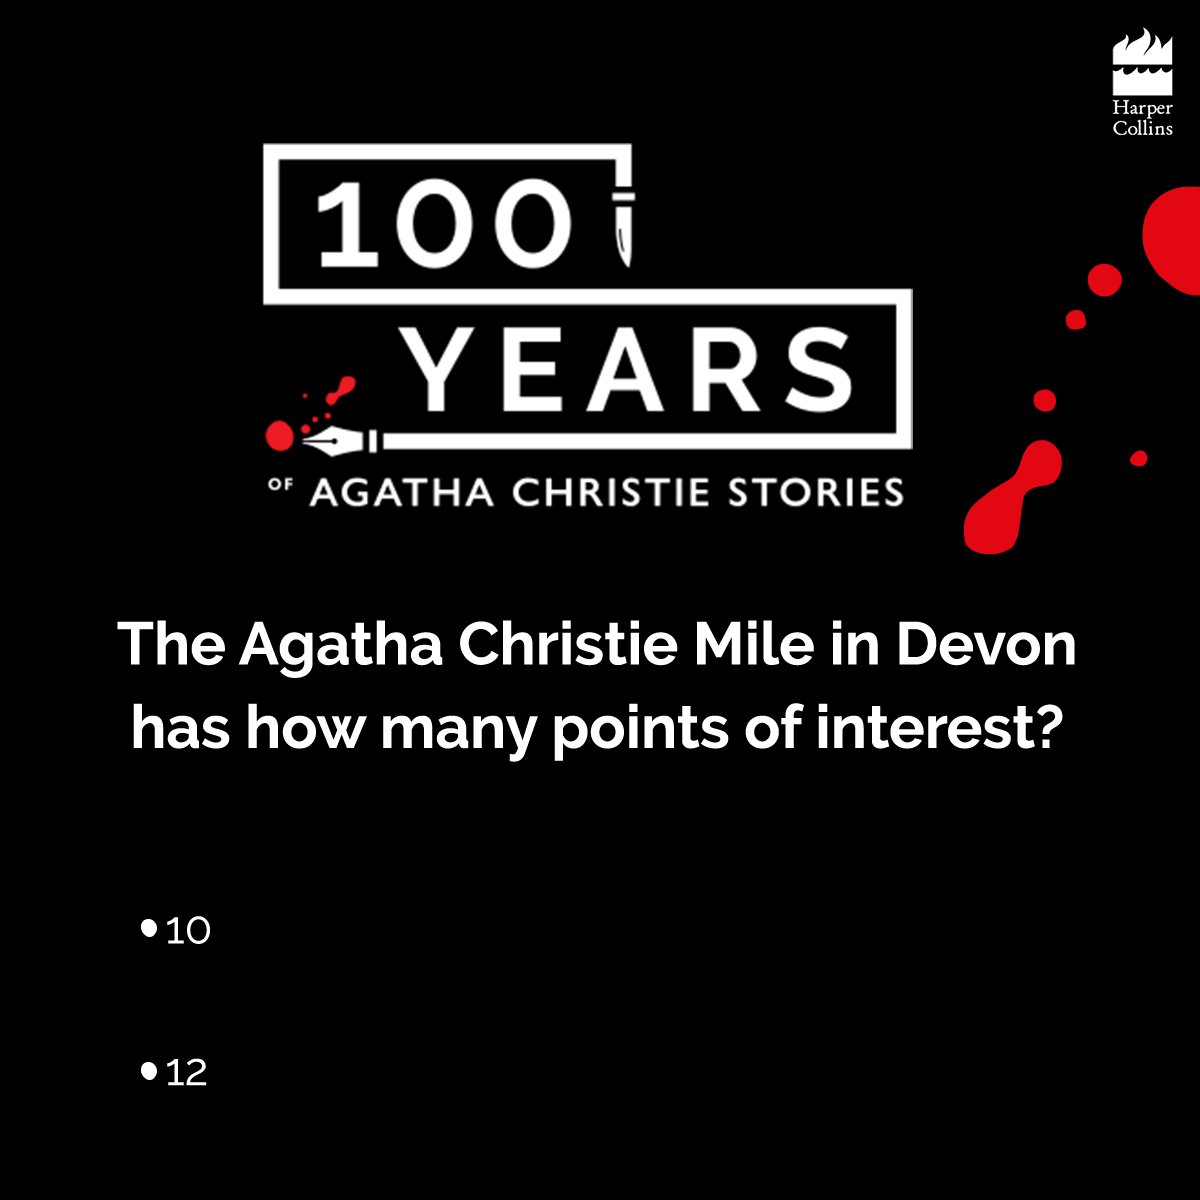 #ContestAlert
Let us know the correct answer in the comments below and stay tuned for the next question. #100YearsOfChristie #Quiz
@agathachristie